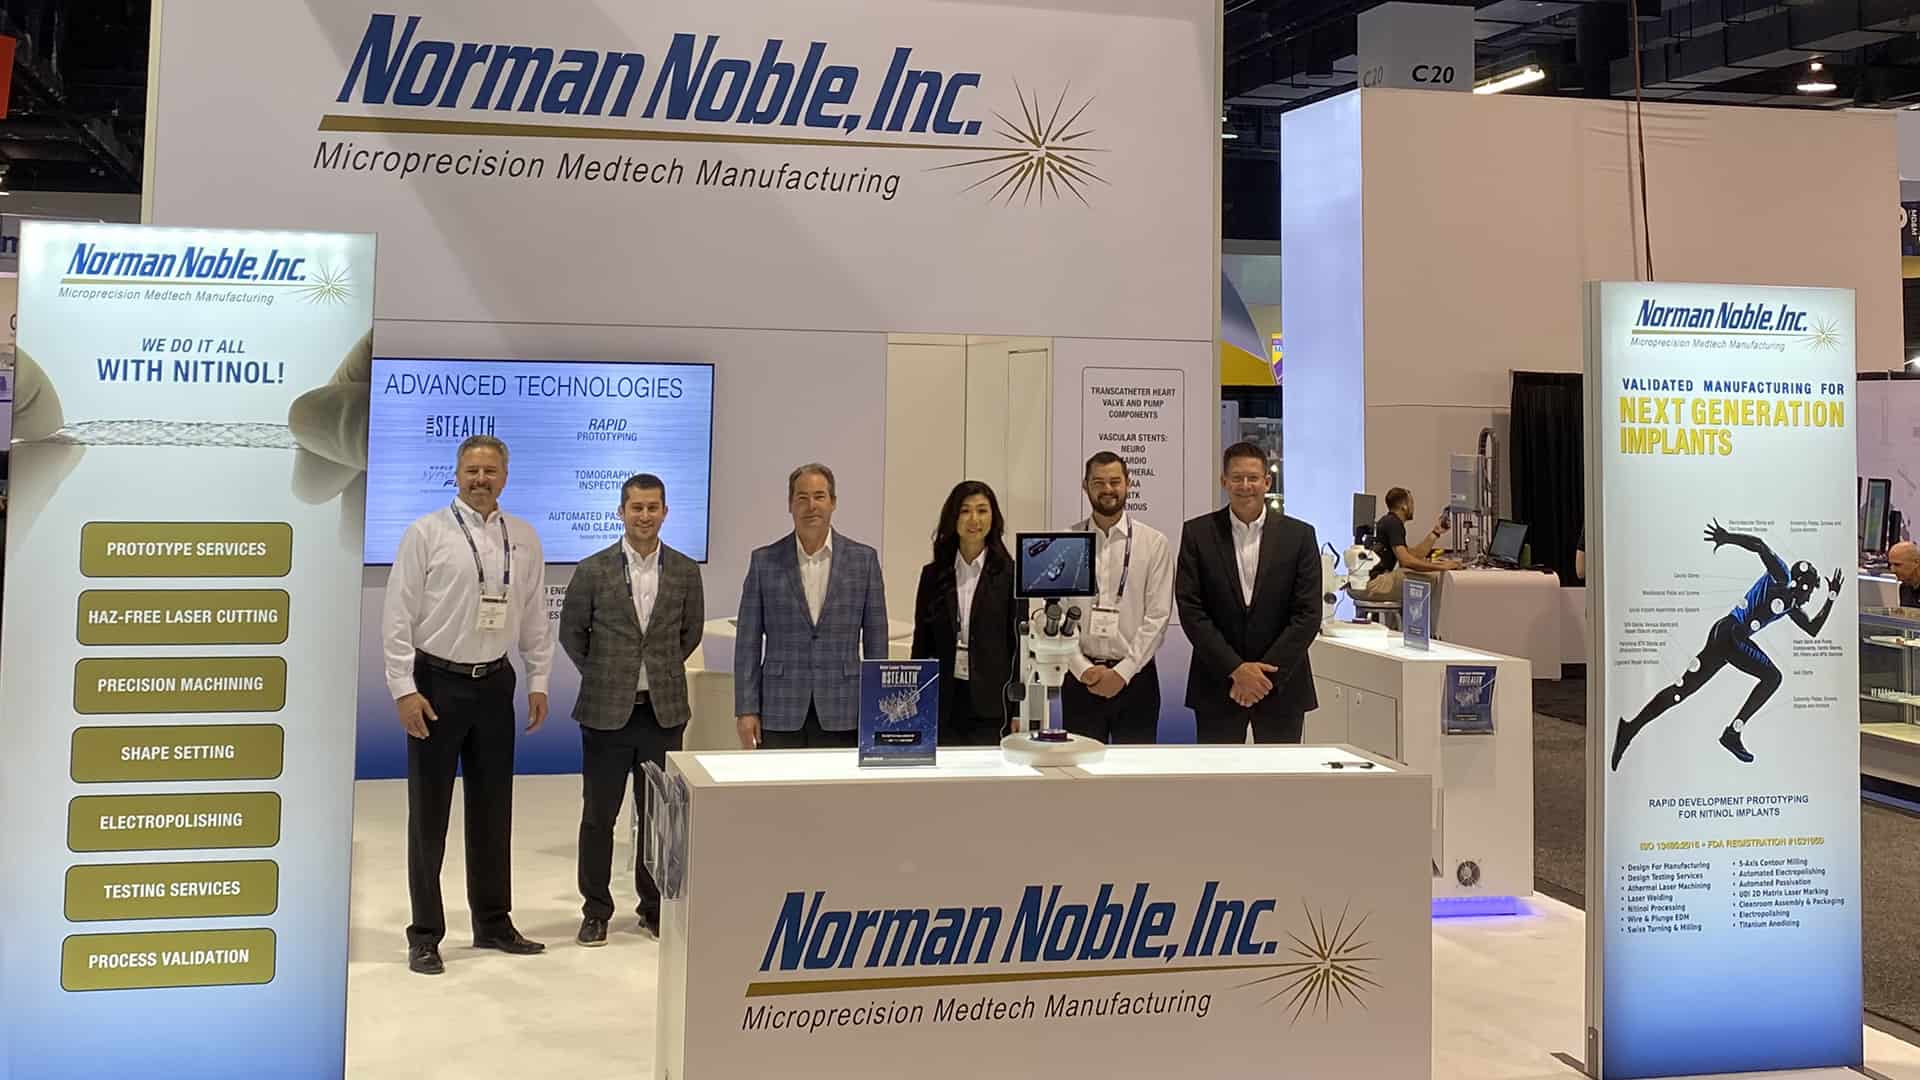 Norman Noble Manufacturing Processes and Capabilities